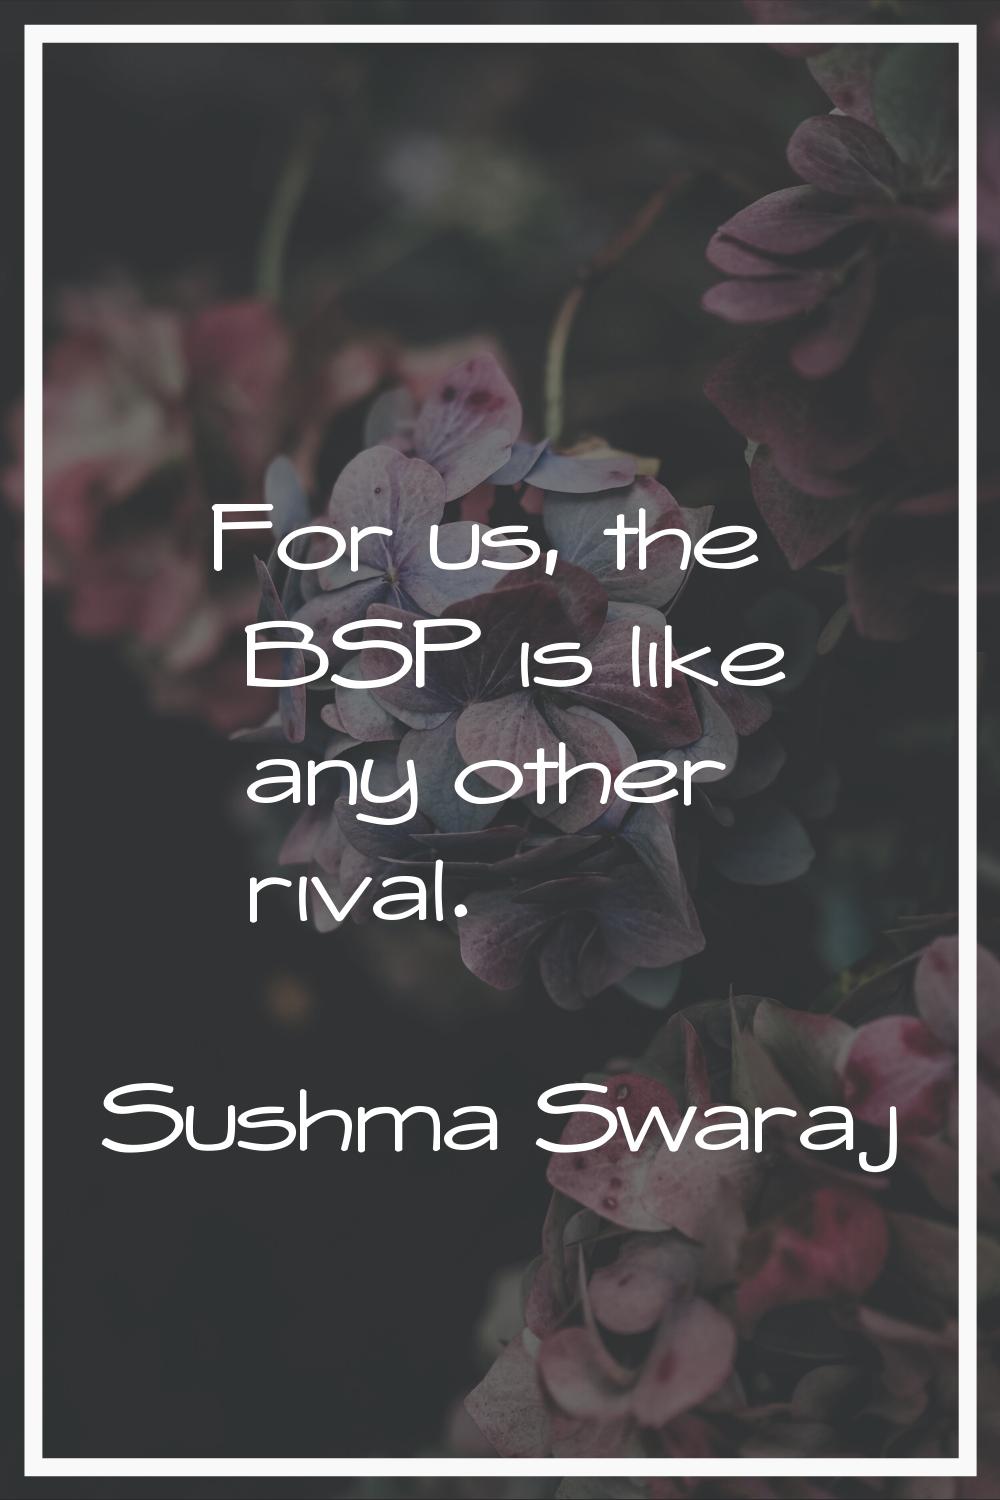 For us, the BSP is like any other rival.